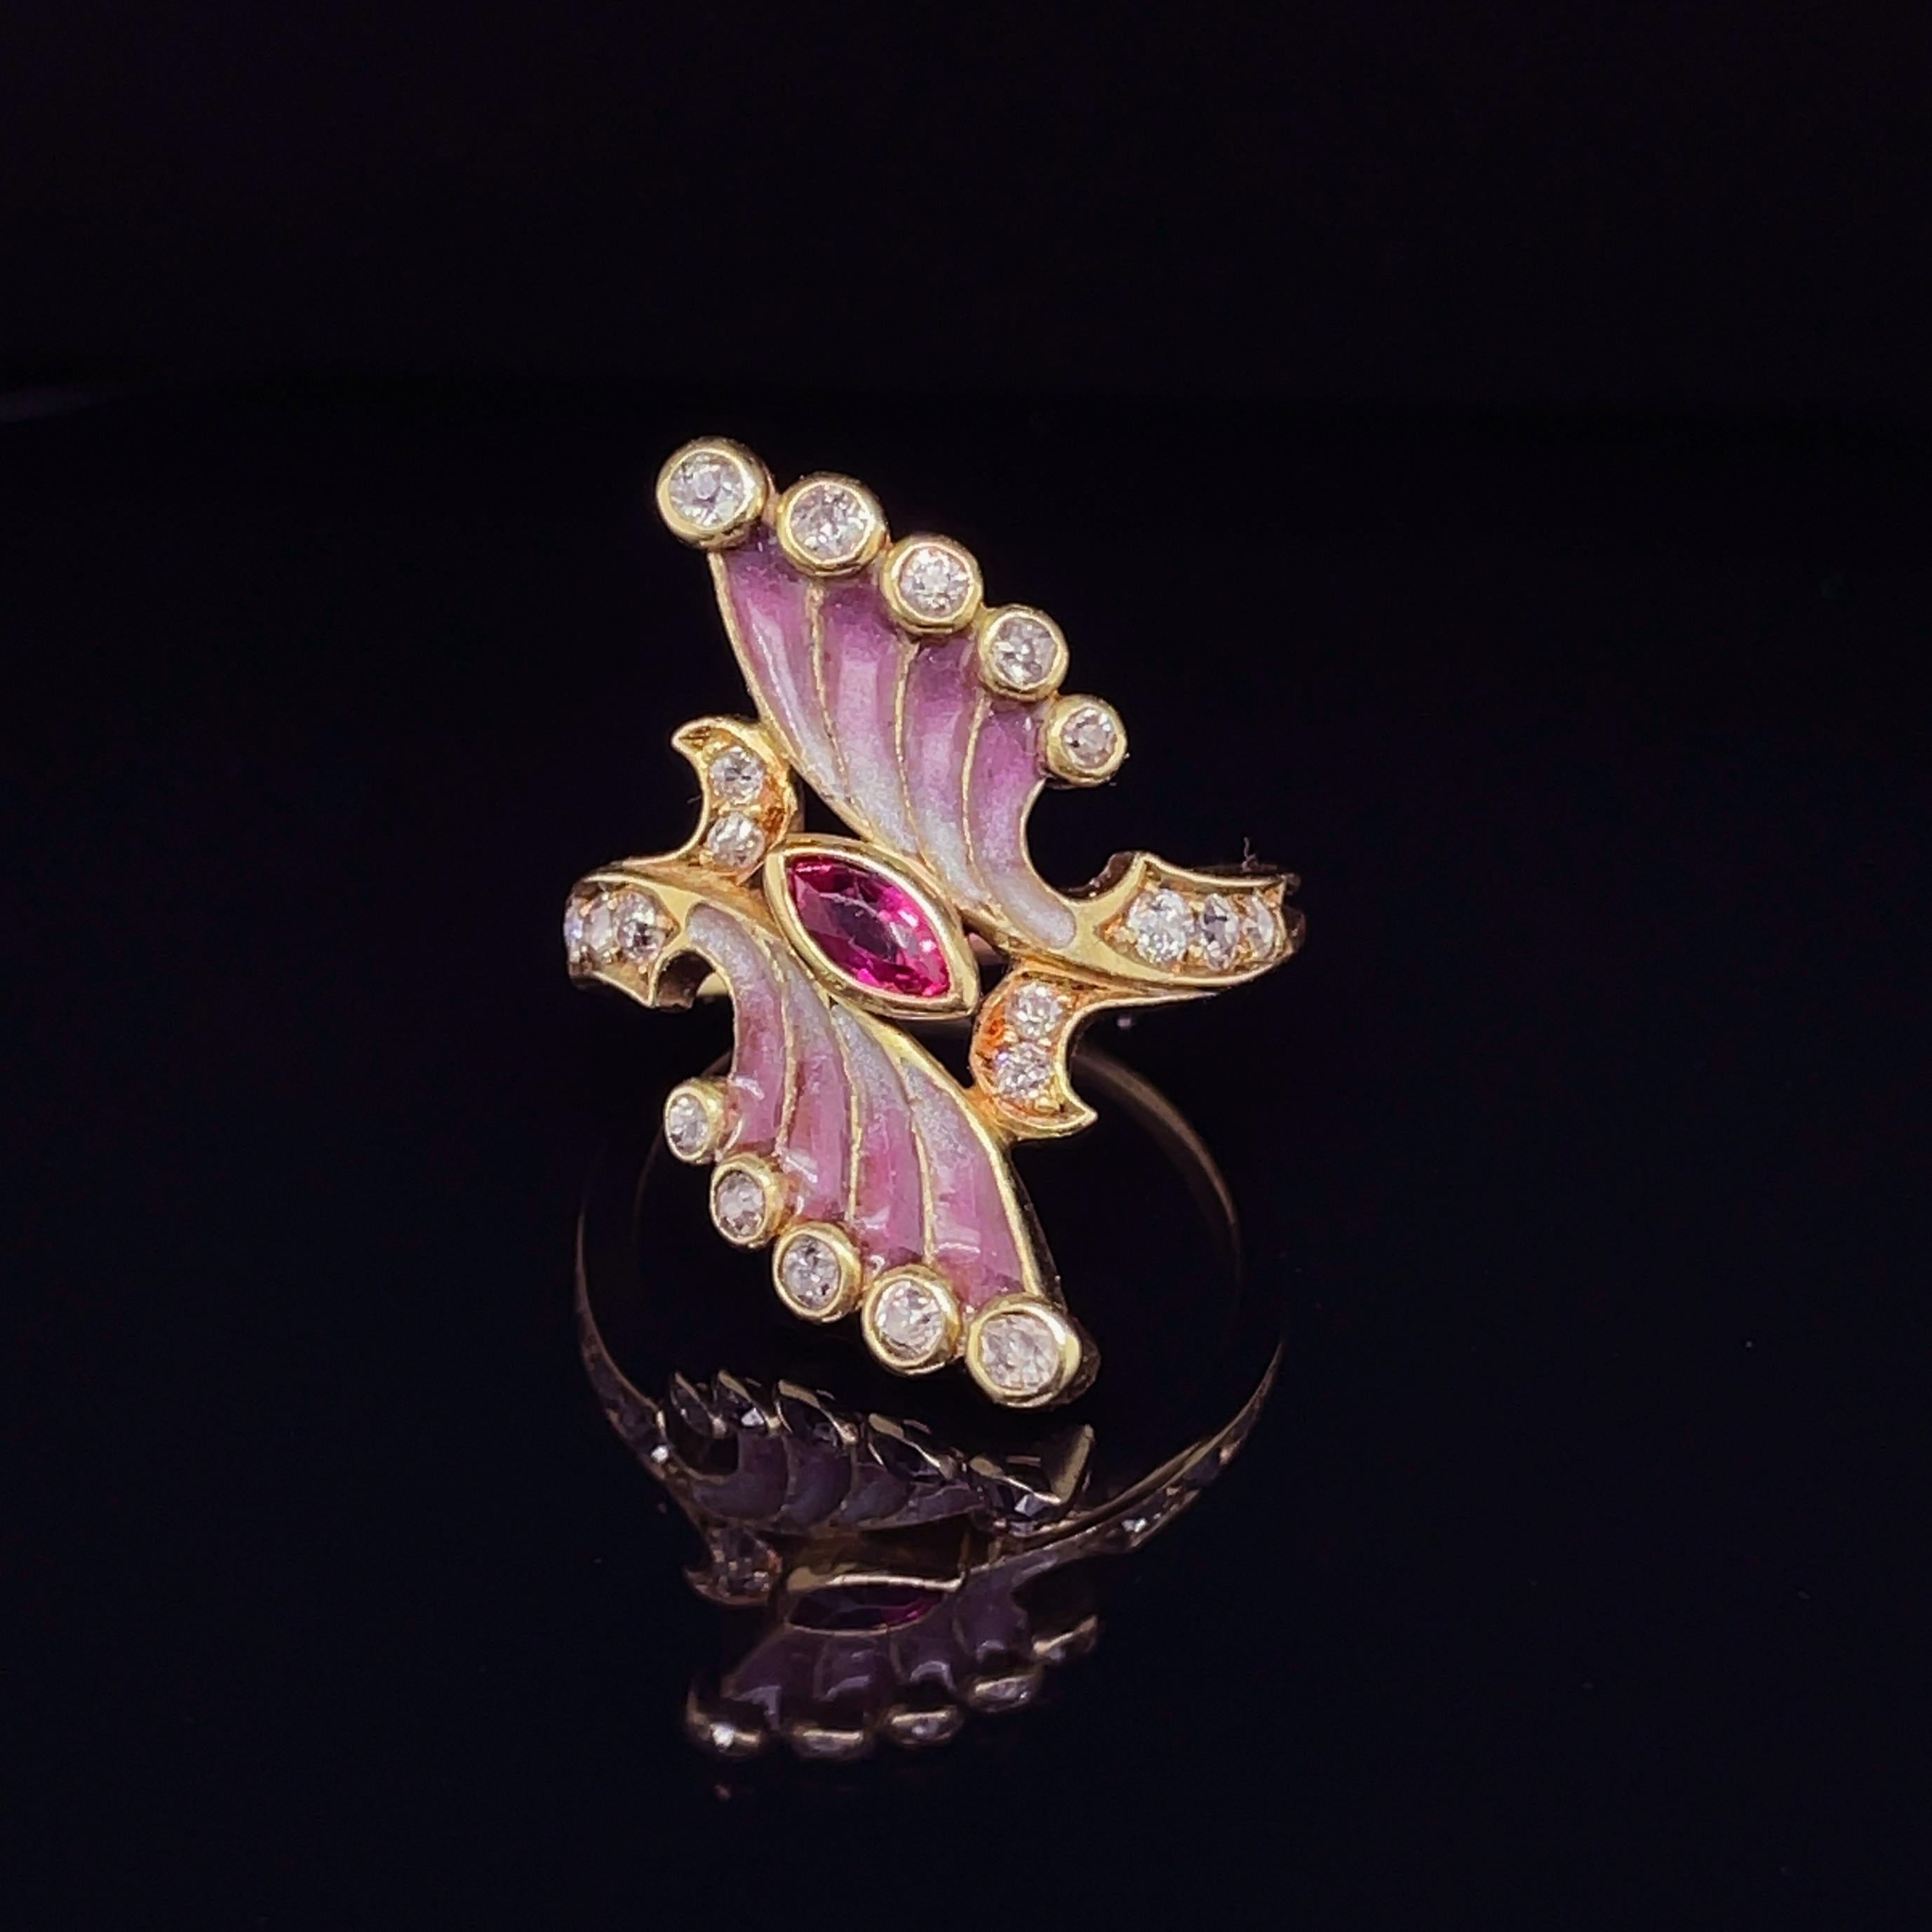 Art Nouveau Plique-a-Jour Enamel Ruby and Diamond Ring, ca. 1900s

A beautiful Art Nouveau ring from the 1900s, centring a marquise shaped ruby and featuring beautiful gradient window-enamelled wings, suspending and surrounded by old-cut diamonds.